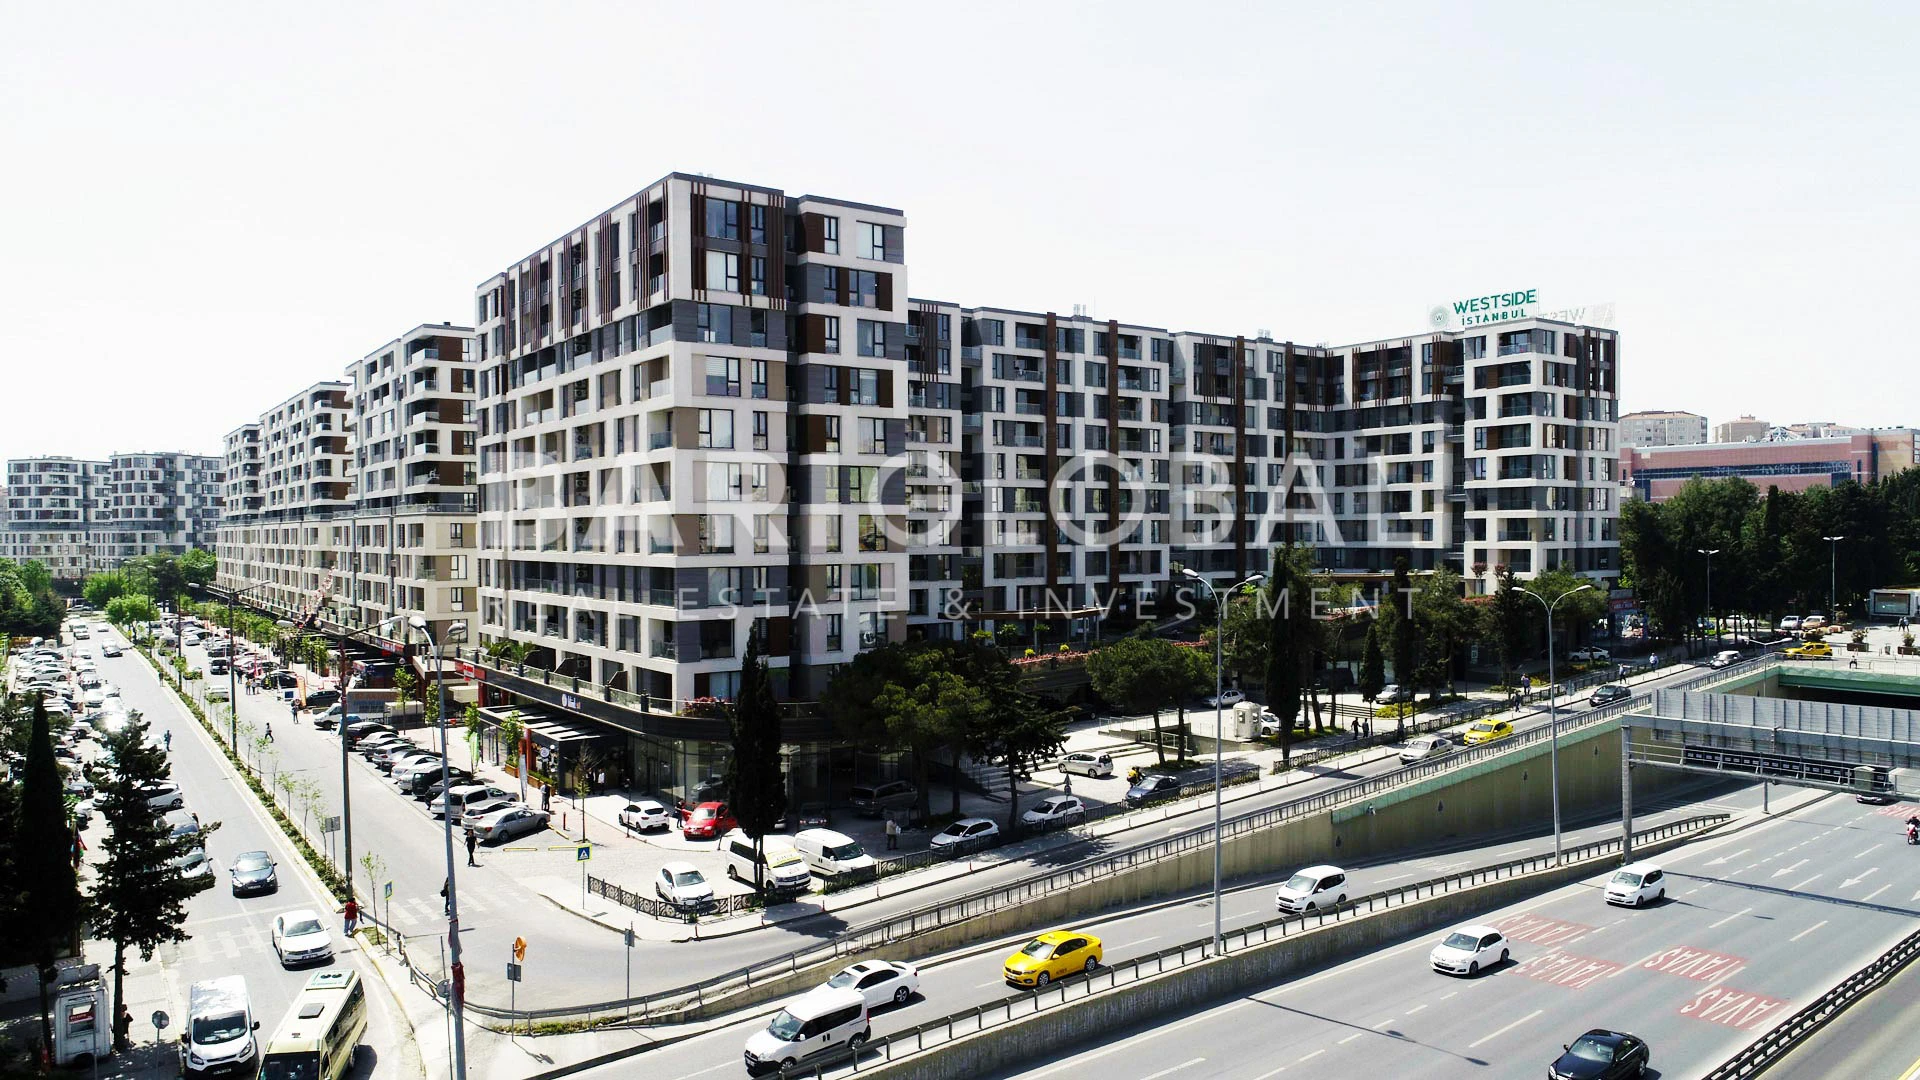 upscale-residential-and-commercial-project-with-plants-and-trees-next-to-main-streets-full-of-cars-in-beylikduzu-district